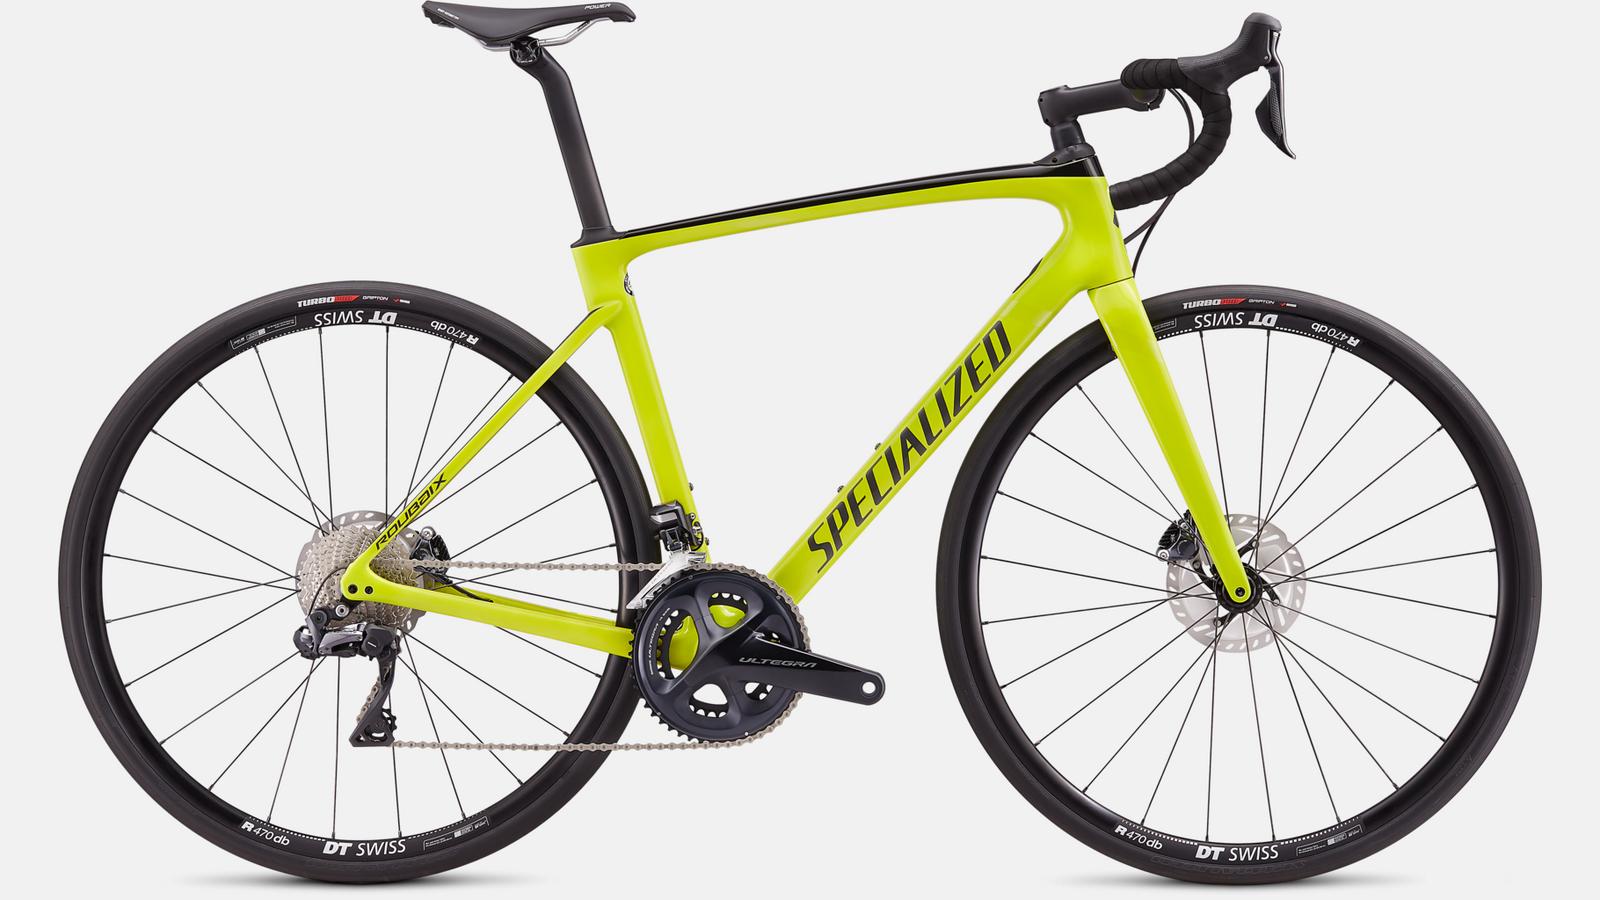 Paint for 2020 Specialized Roubaix Comp – Shimano Ultegra Di2 - Gloss Hyper Green